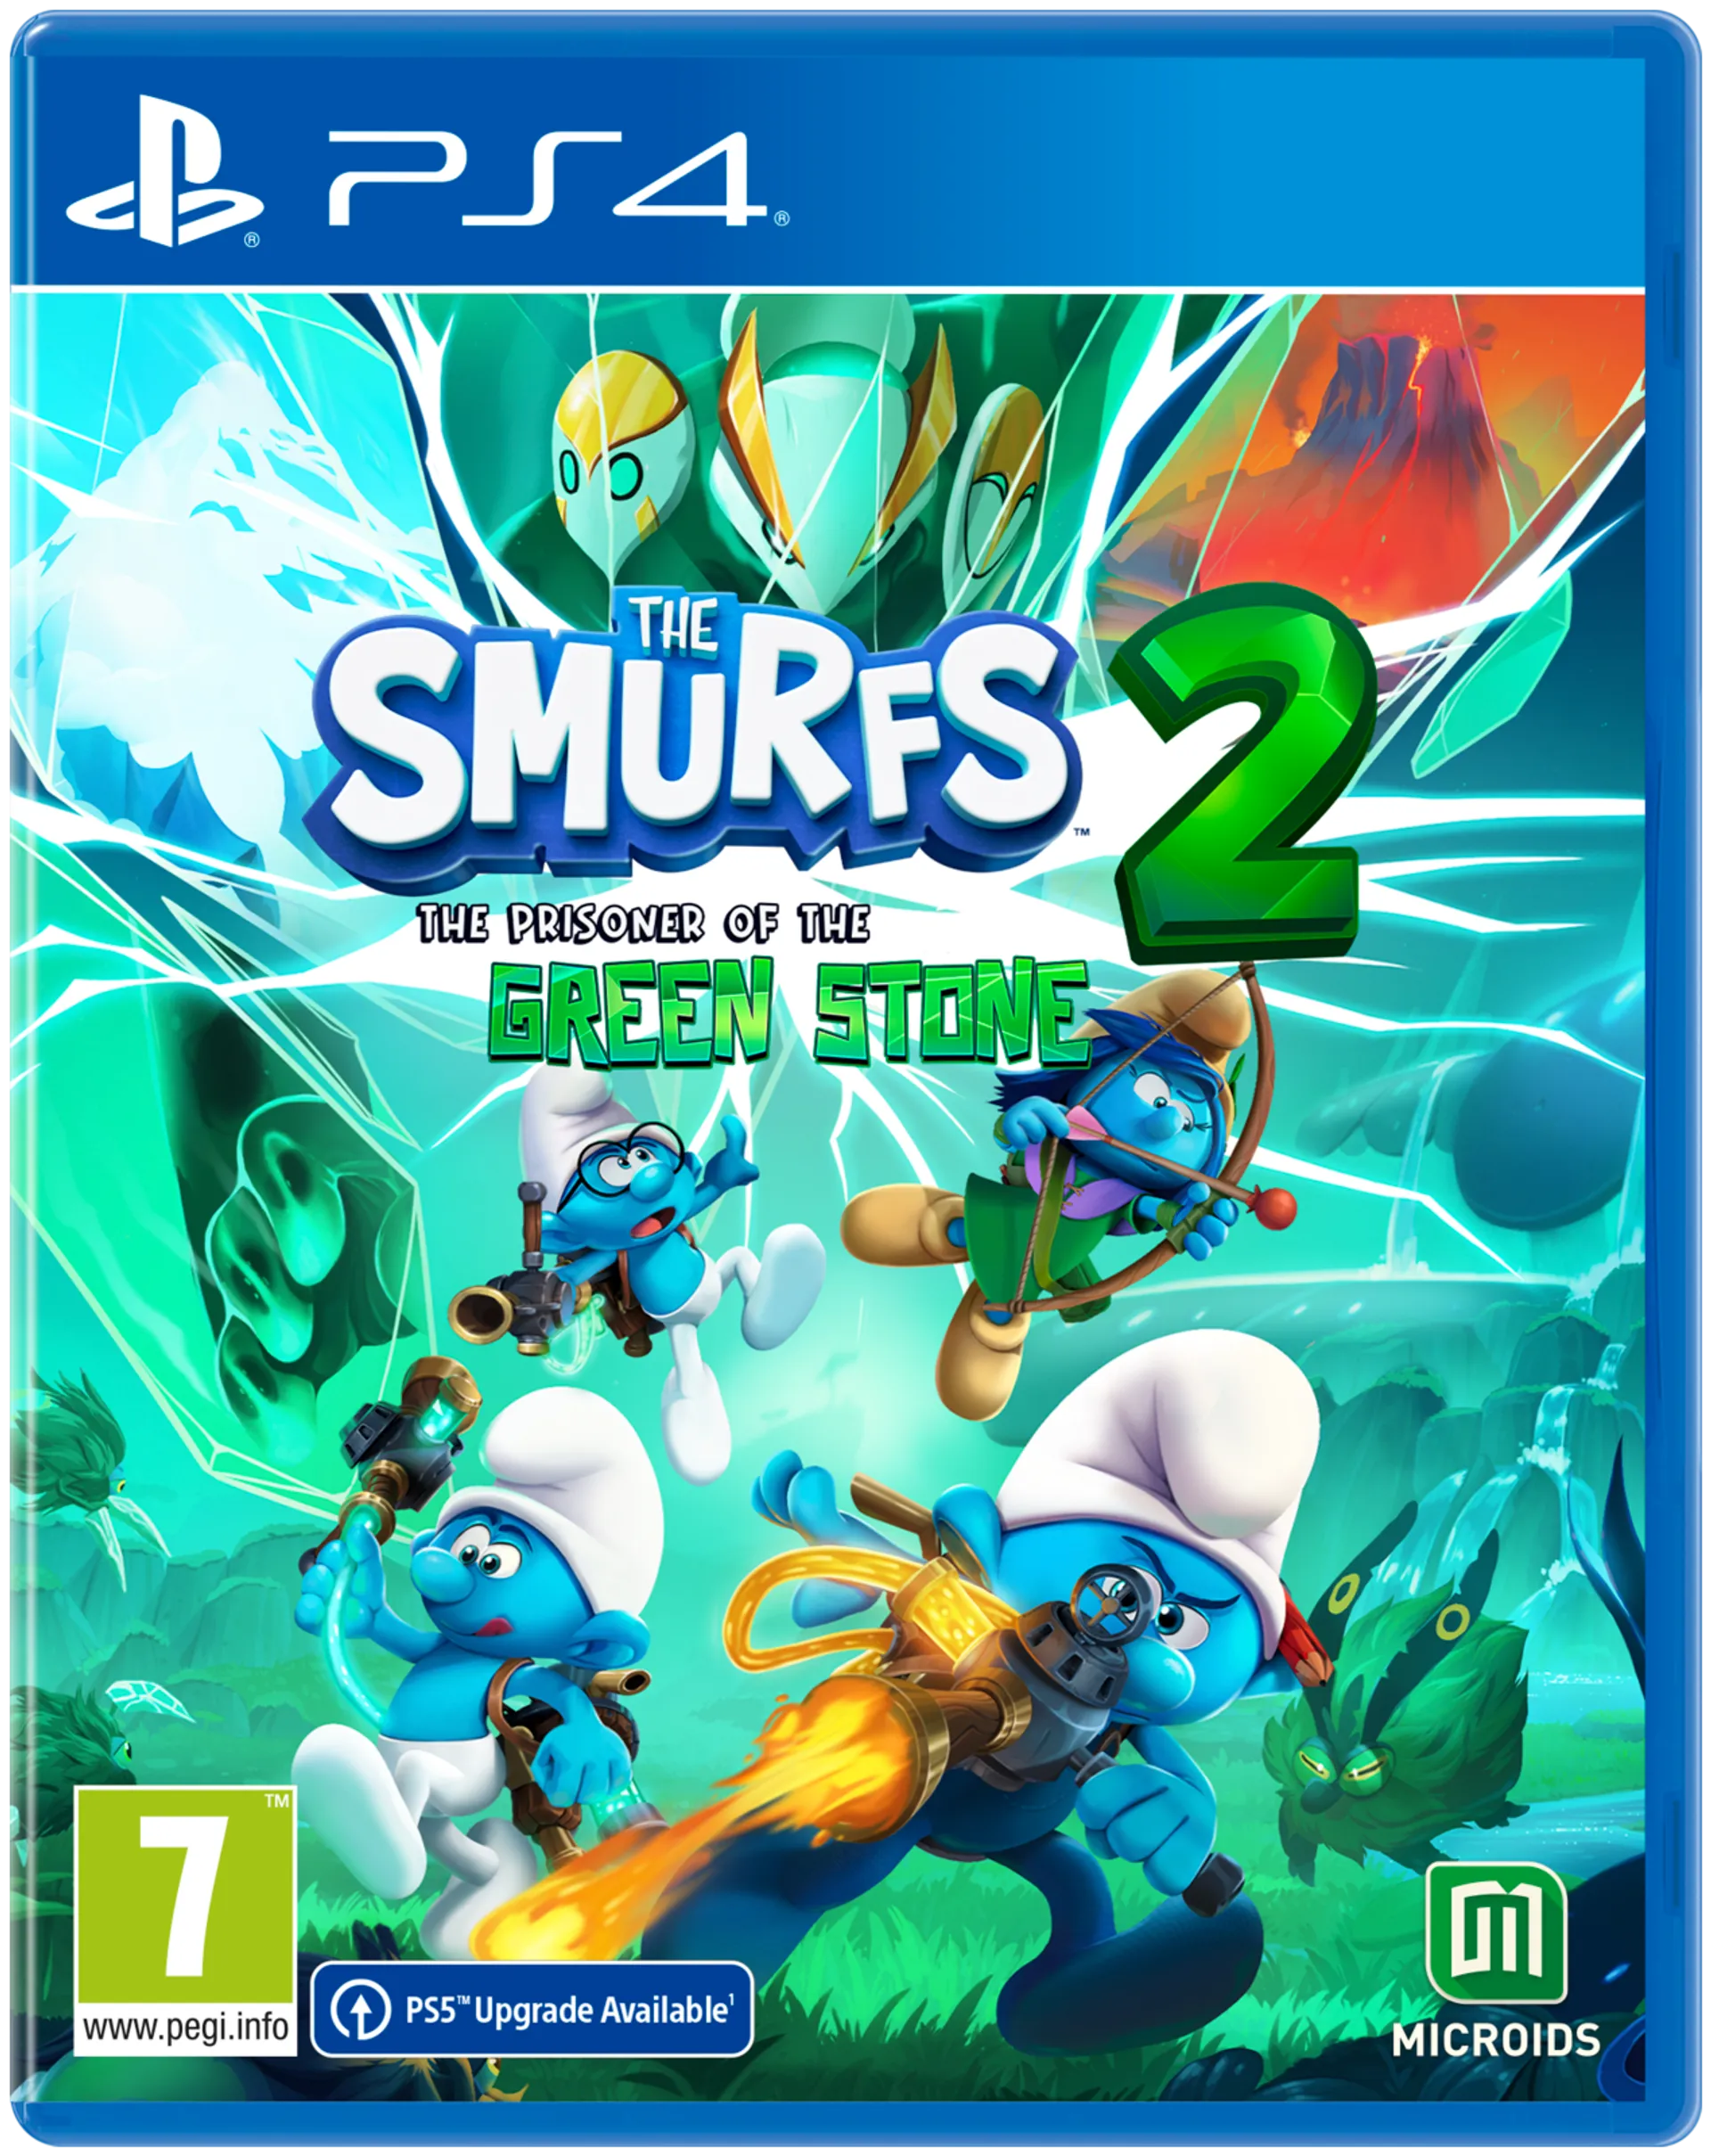 PS4 The Smurfs 2 Green Stone